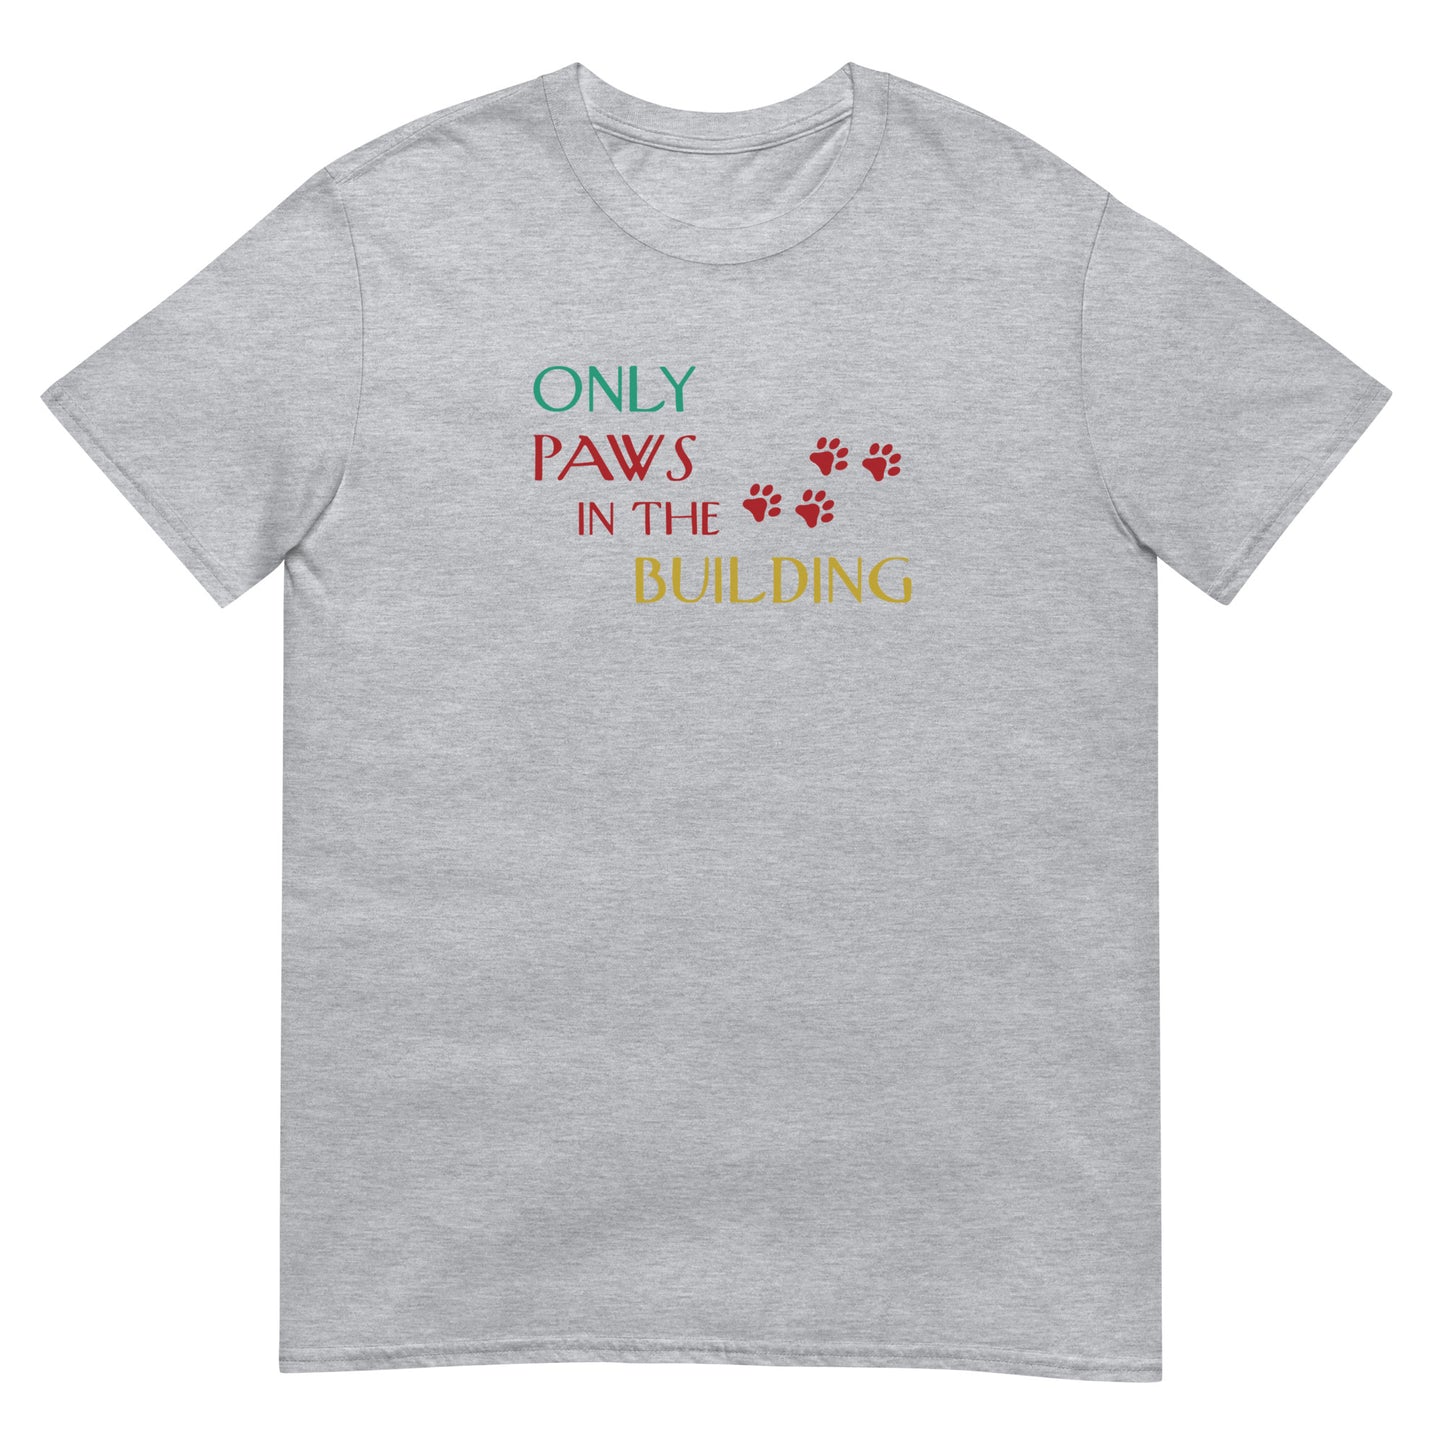 Only Paws in the Building T-Shirt